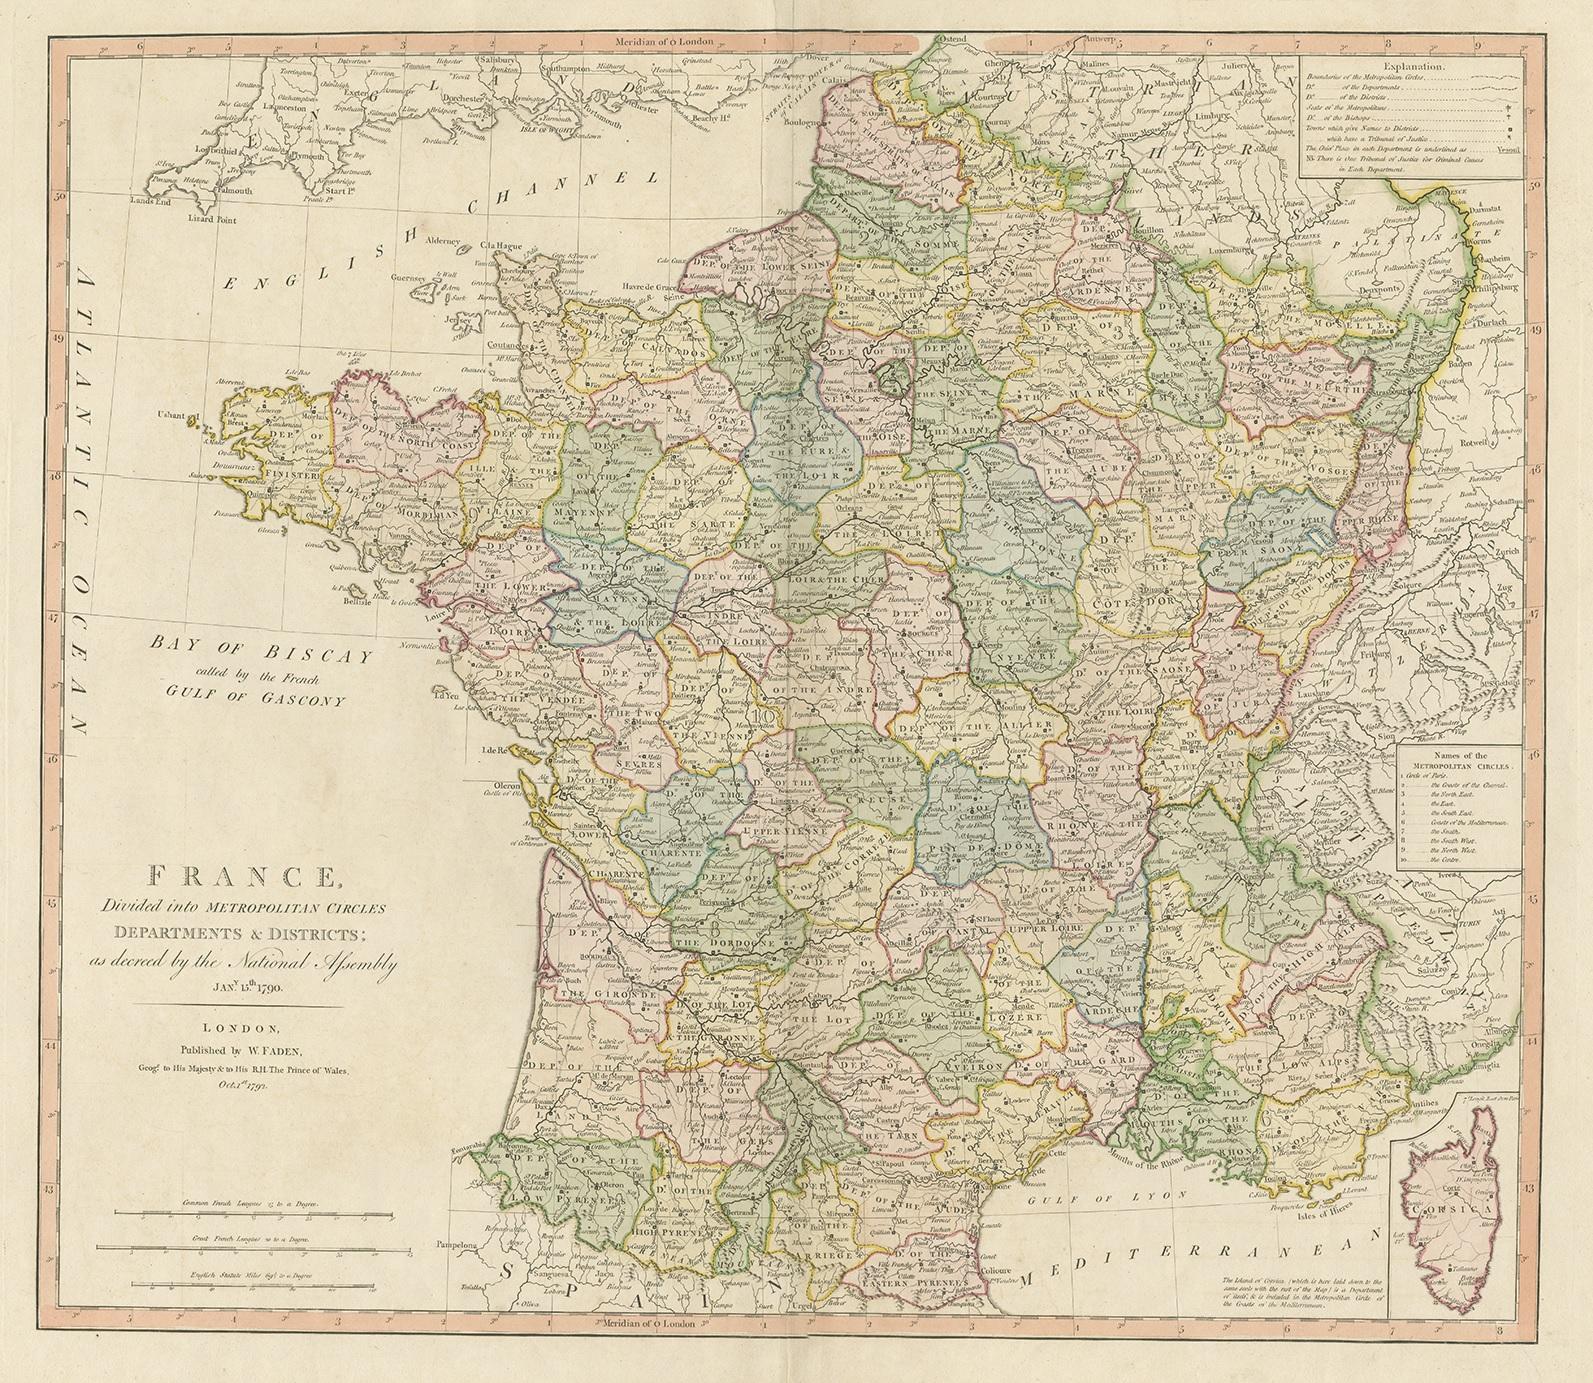 Antique map titled 'France divided into Metropolitan Circles (..)'. Large, original antique map of France, with a small inset of the island of Corsica. Published by W. Faden, 1792.